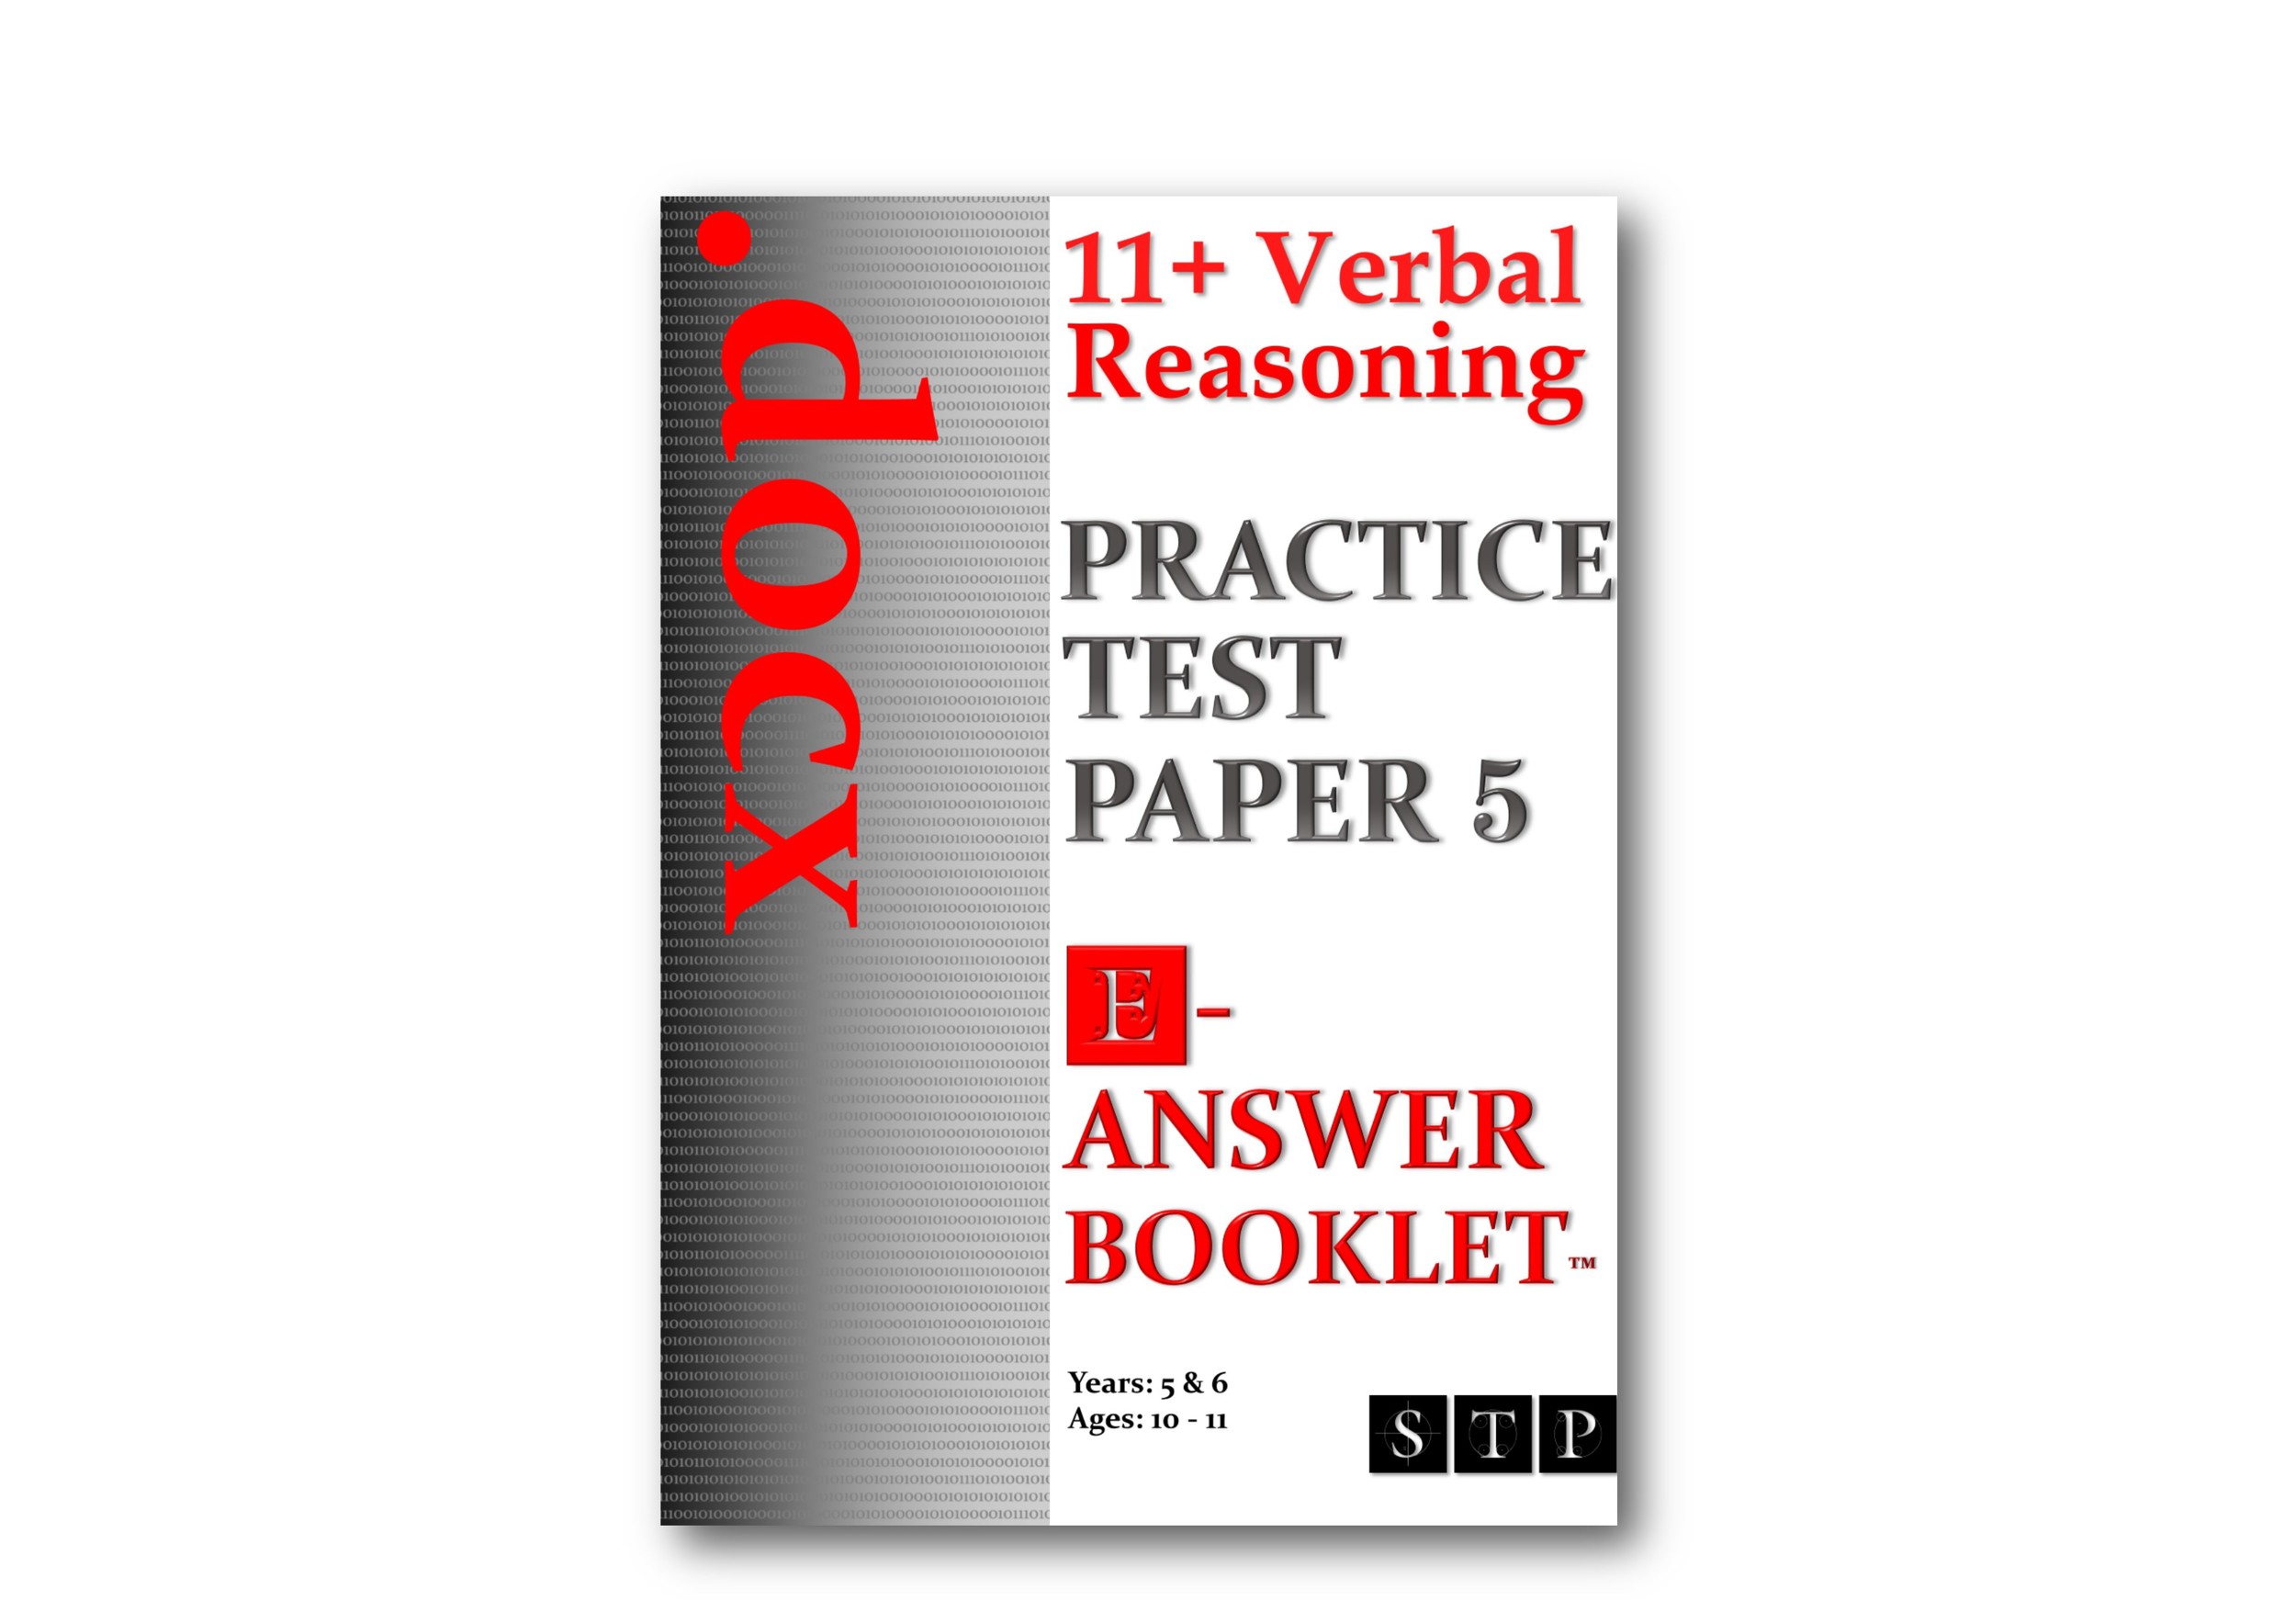 11+ Verbal Reasoning Practice Test Paper 5 (E-Answer Booklet).jpg